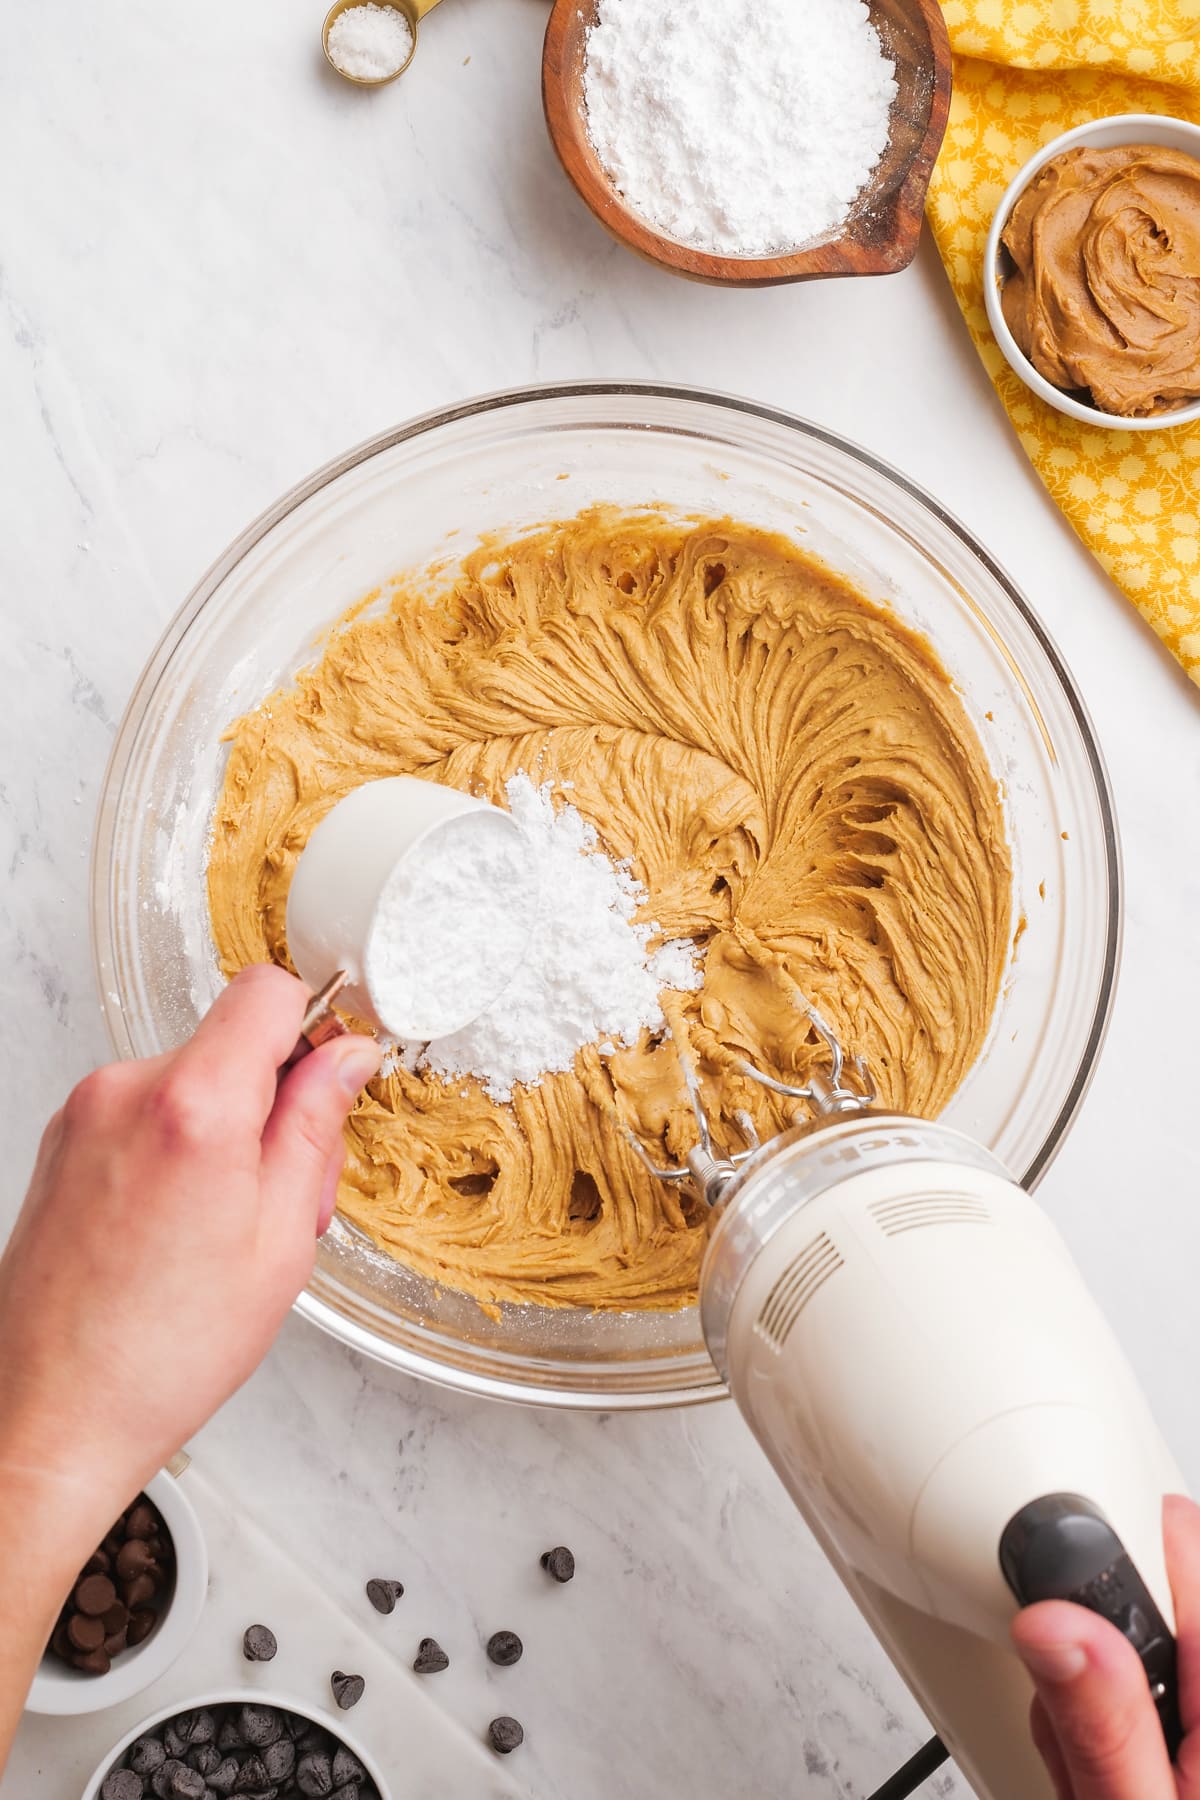 Woman's hand adding powdered sugar to peanut butter mixture while hand mixer is mixing